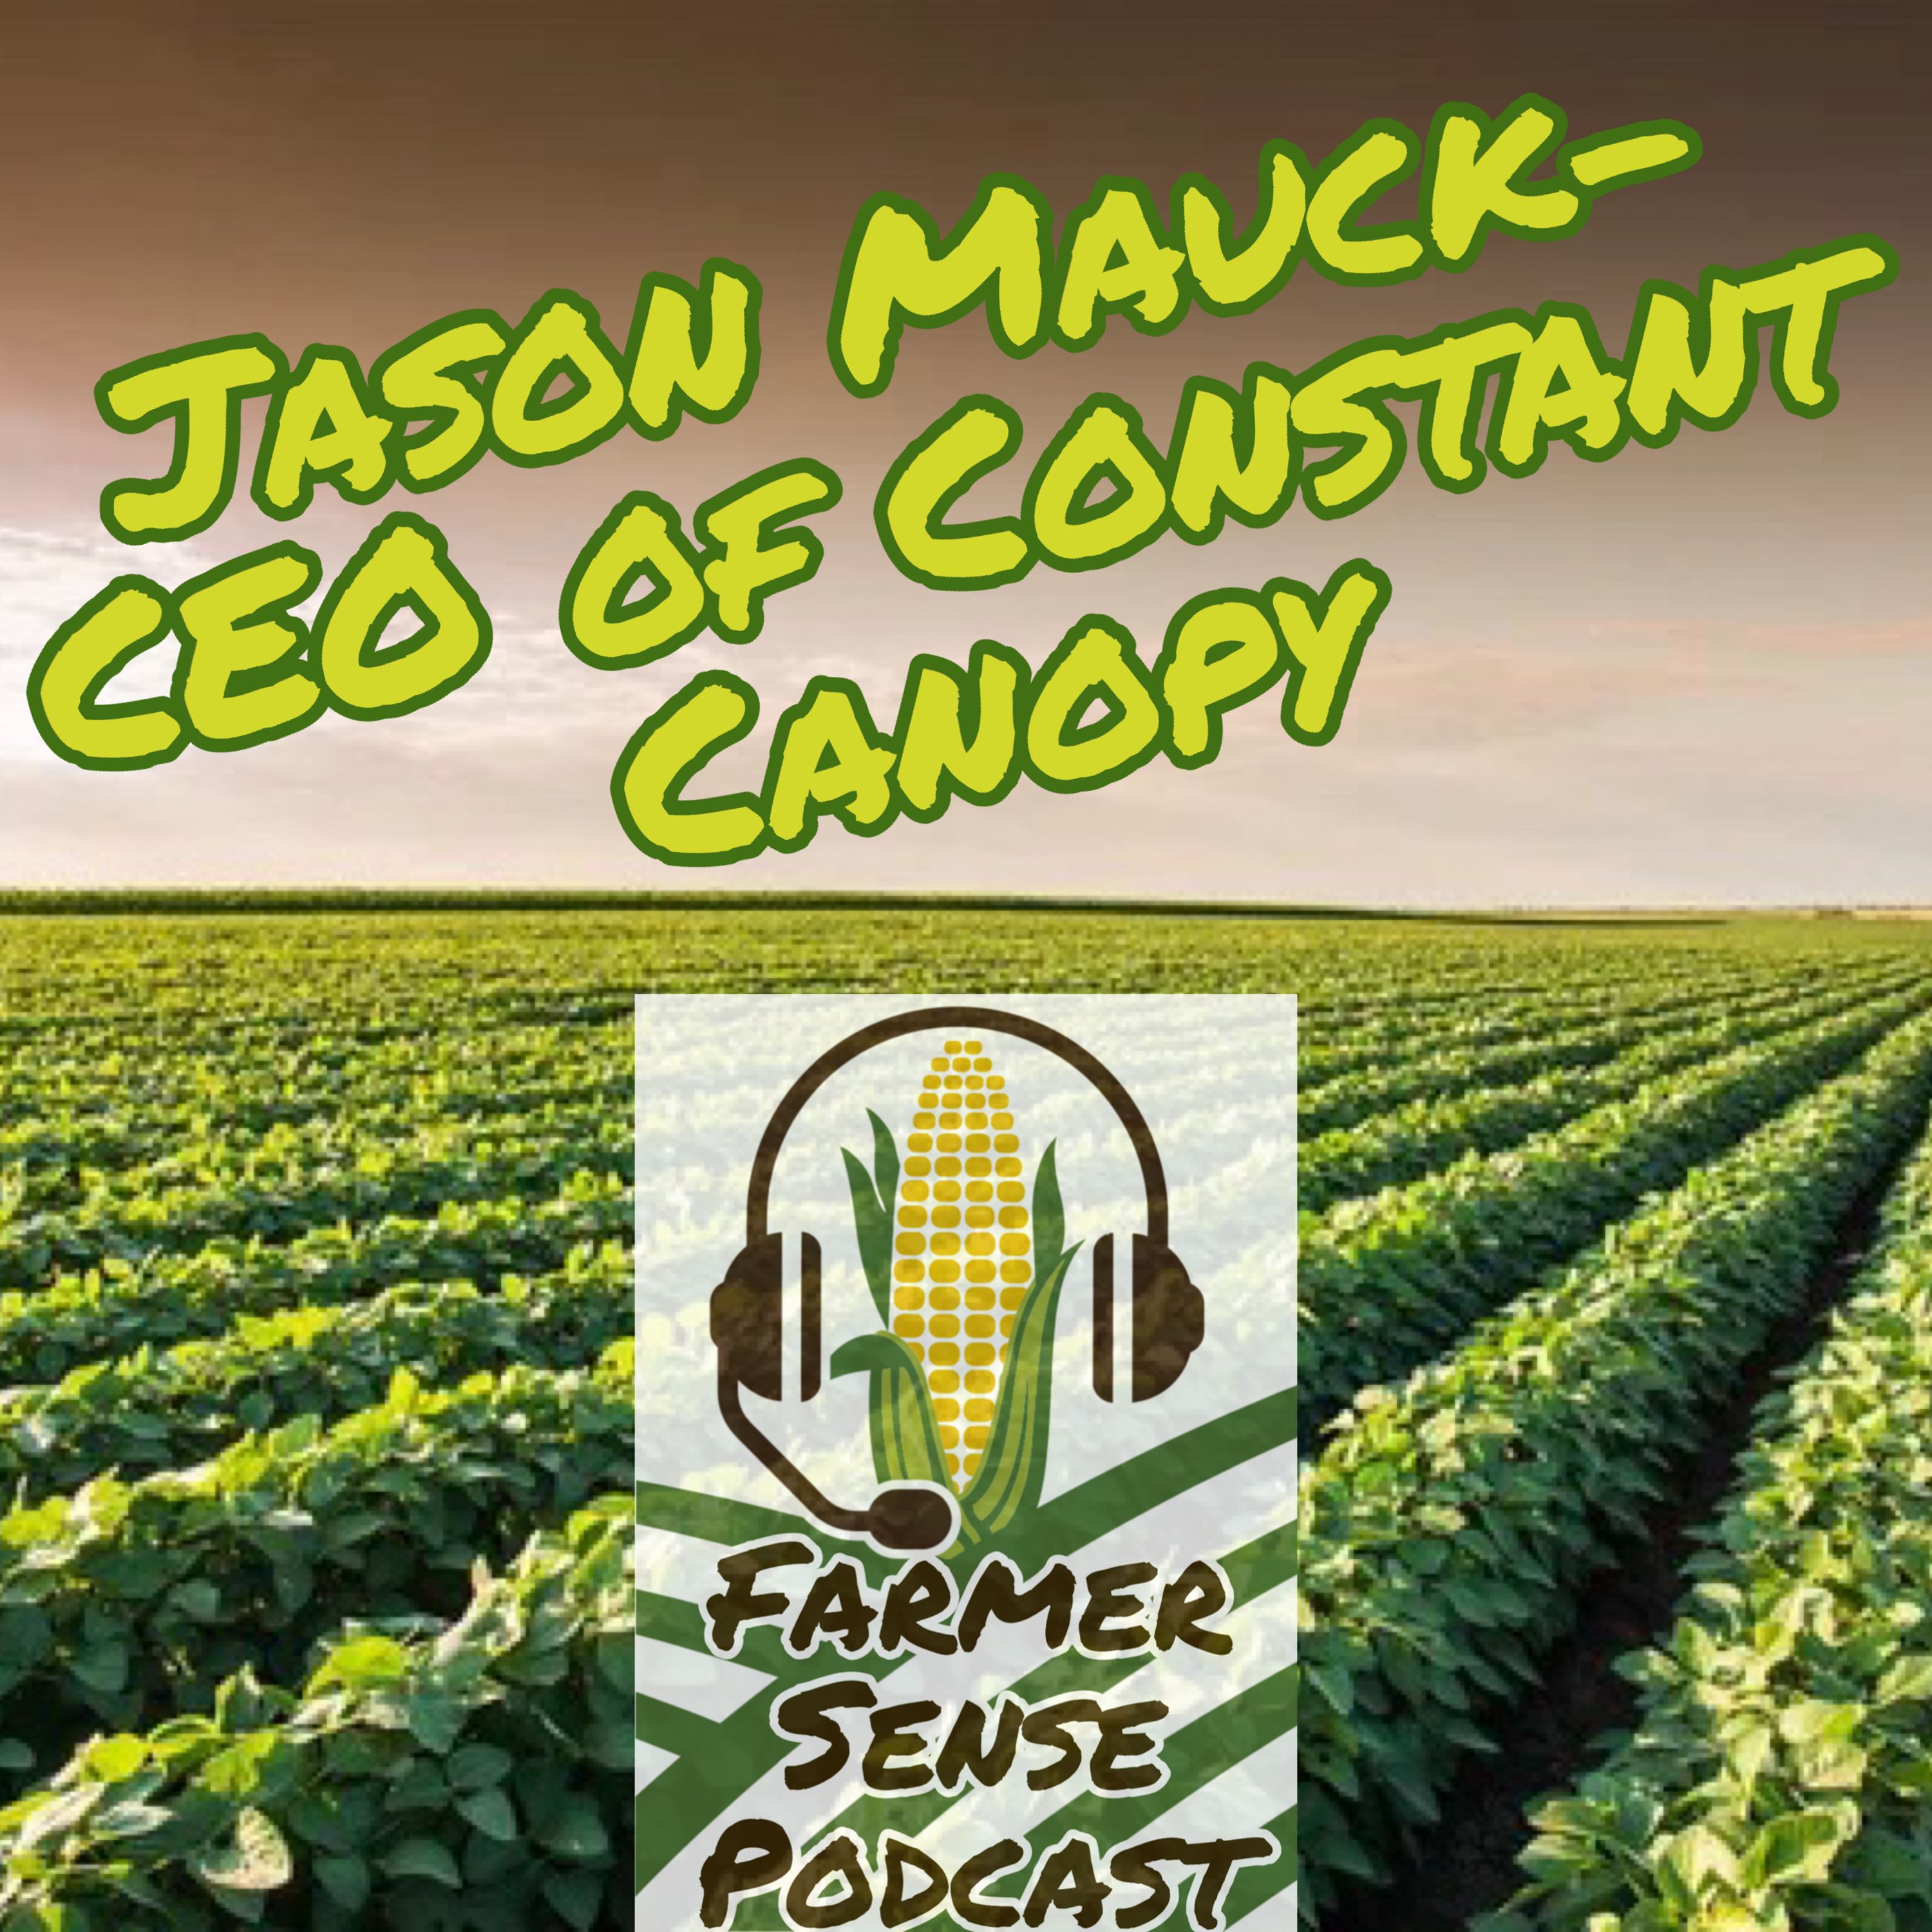 Constant Canopy CEO, Jason Mauck